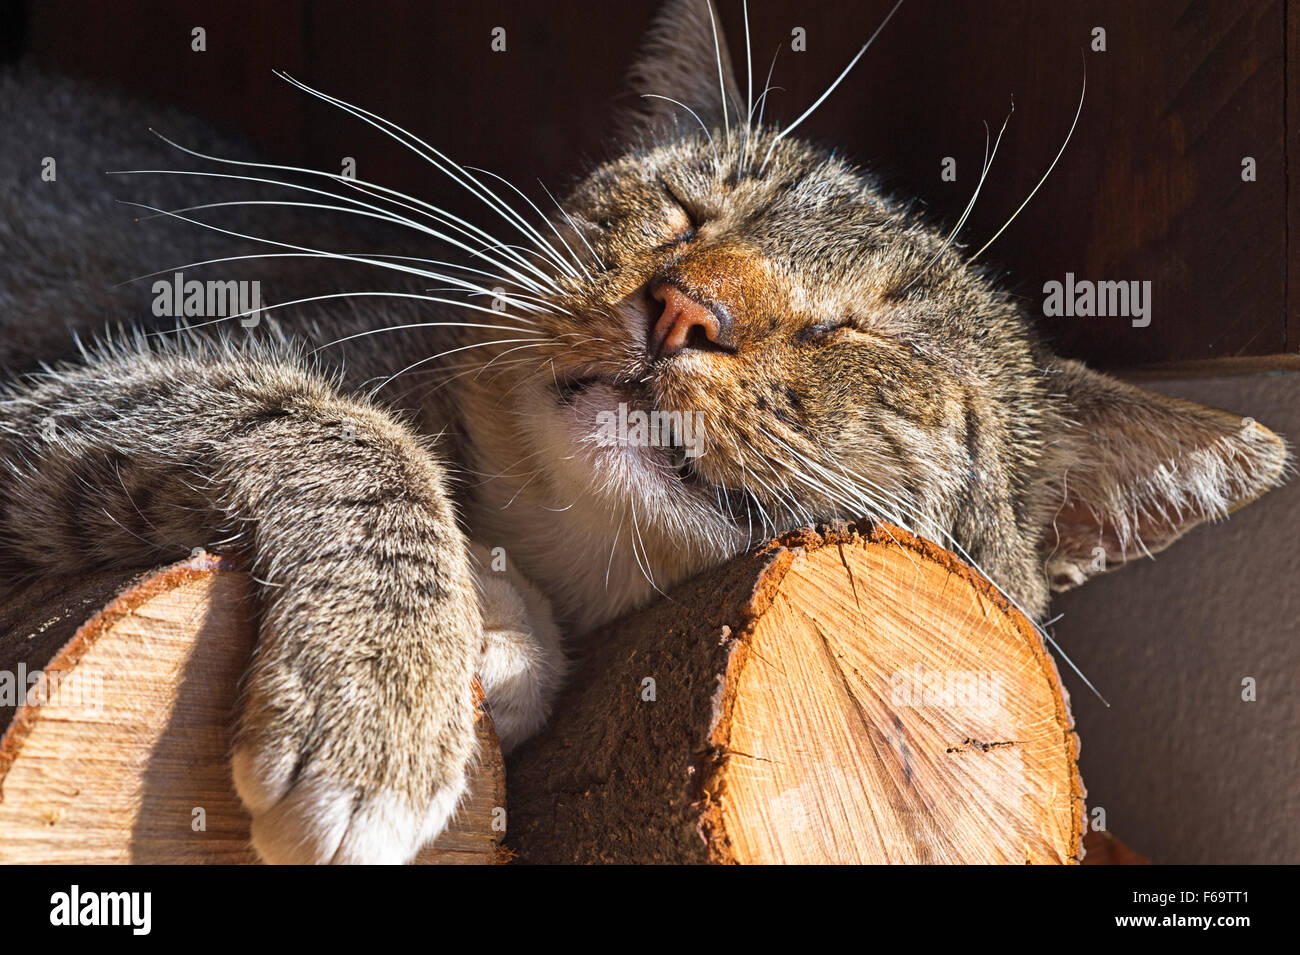 Tabby domestic cat sleeping on a pile of firewood Stock Photo